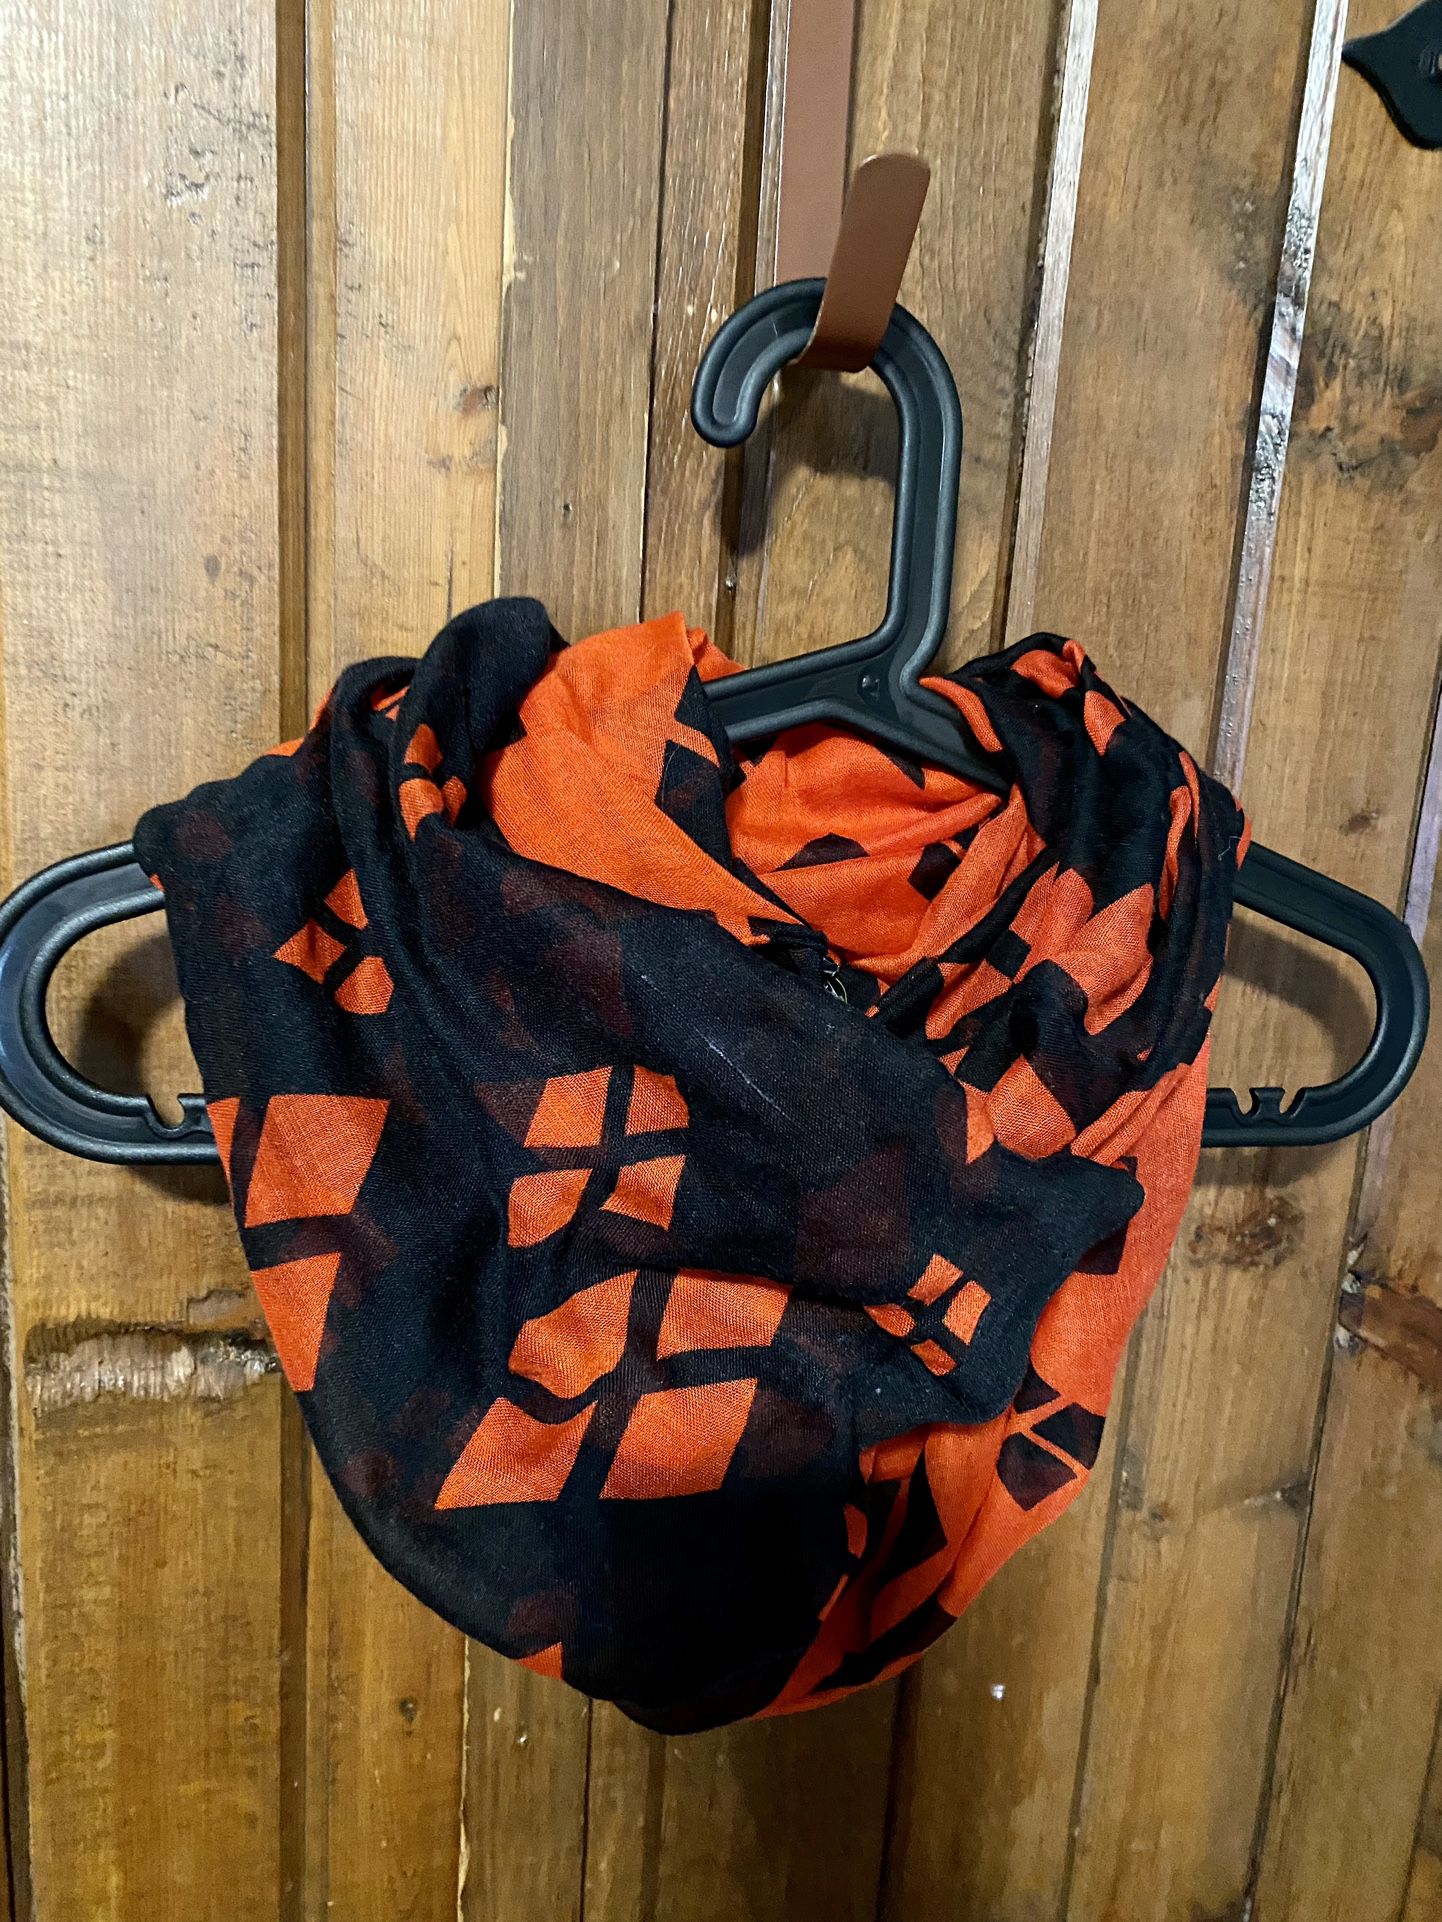 Harlequin Inspired Infinity Scarf